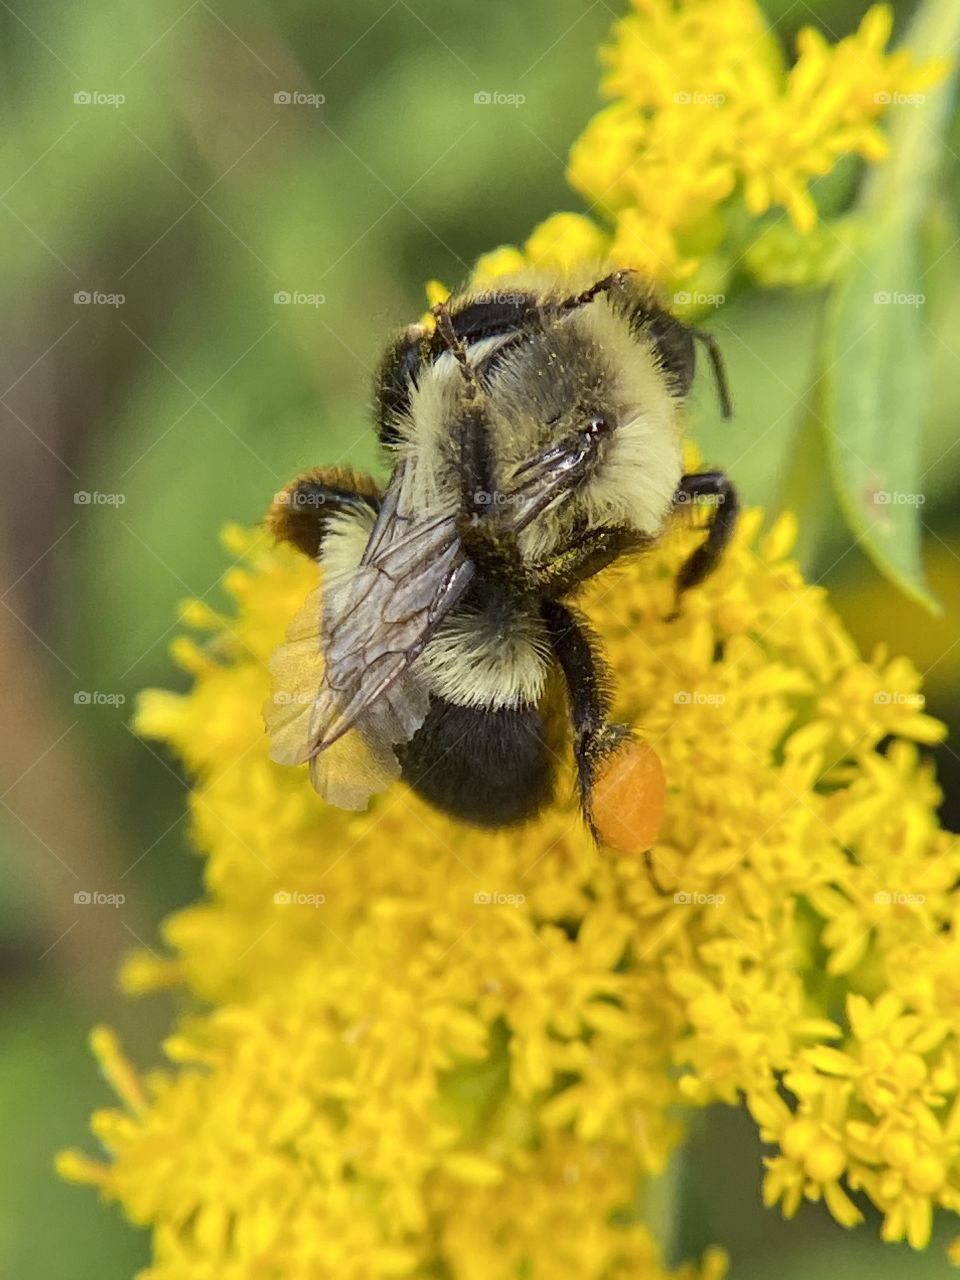 A bumble bee cleaning it's wings while taking a break from digging pollen from a bright yellow flower on a warm sunny day in late summer in 2020.